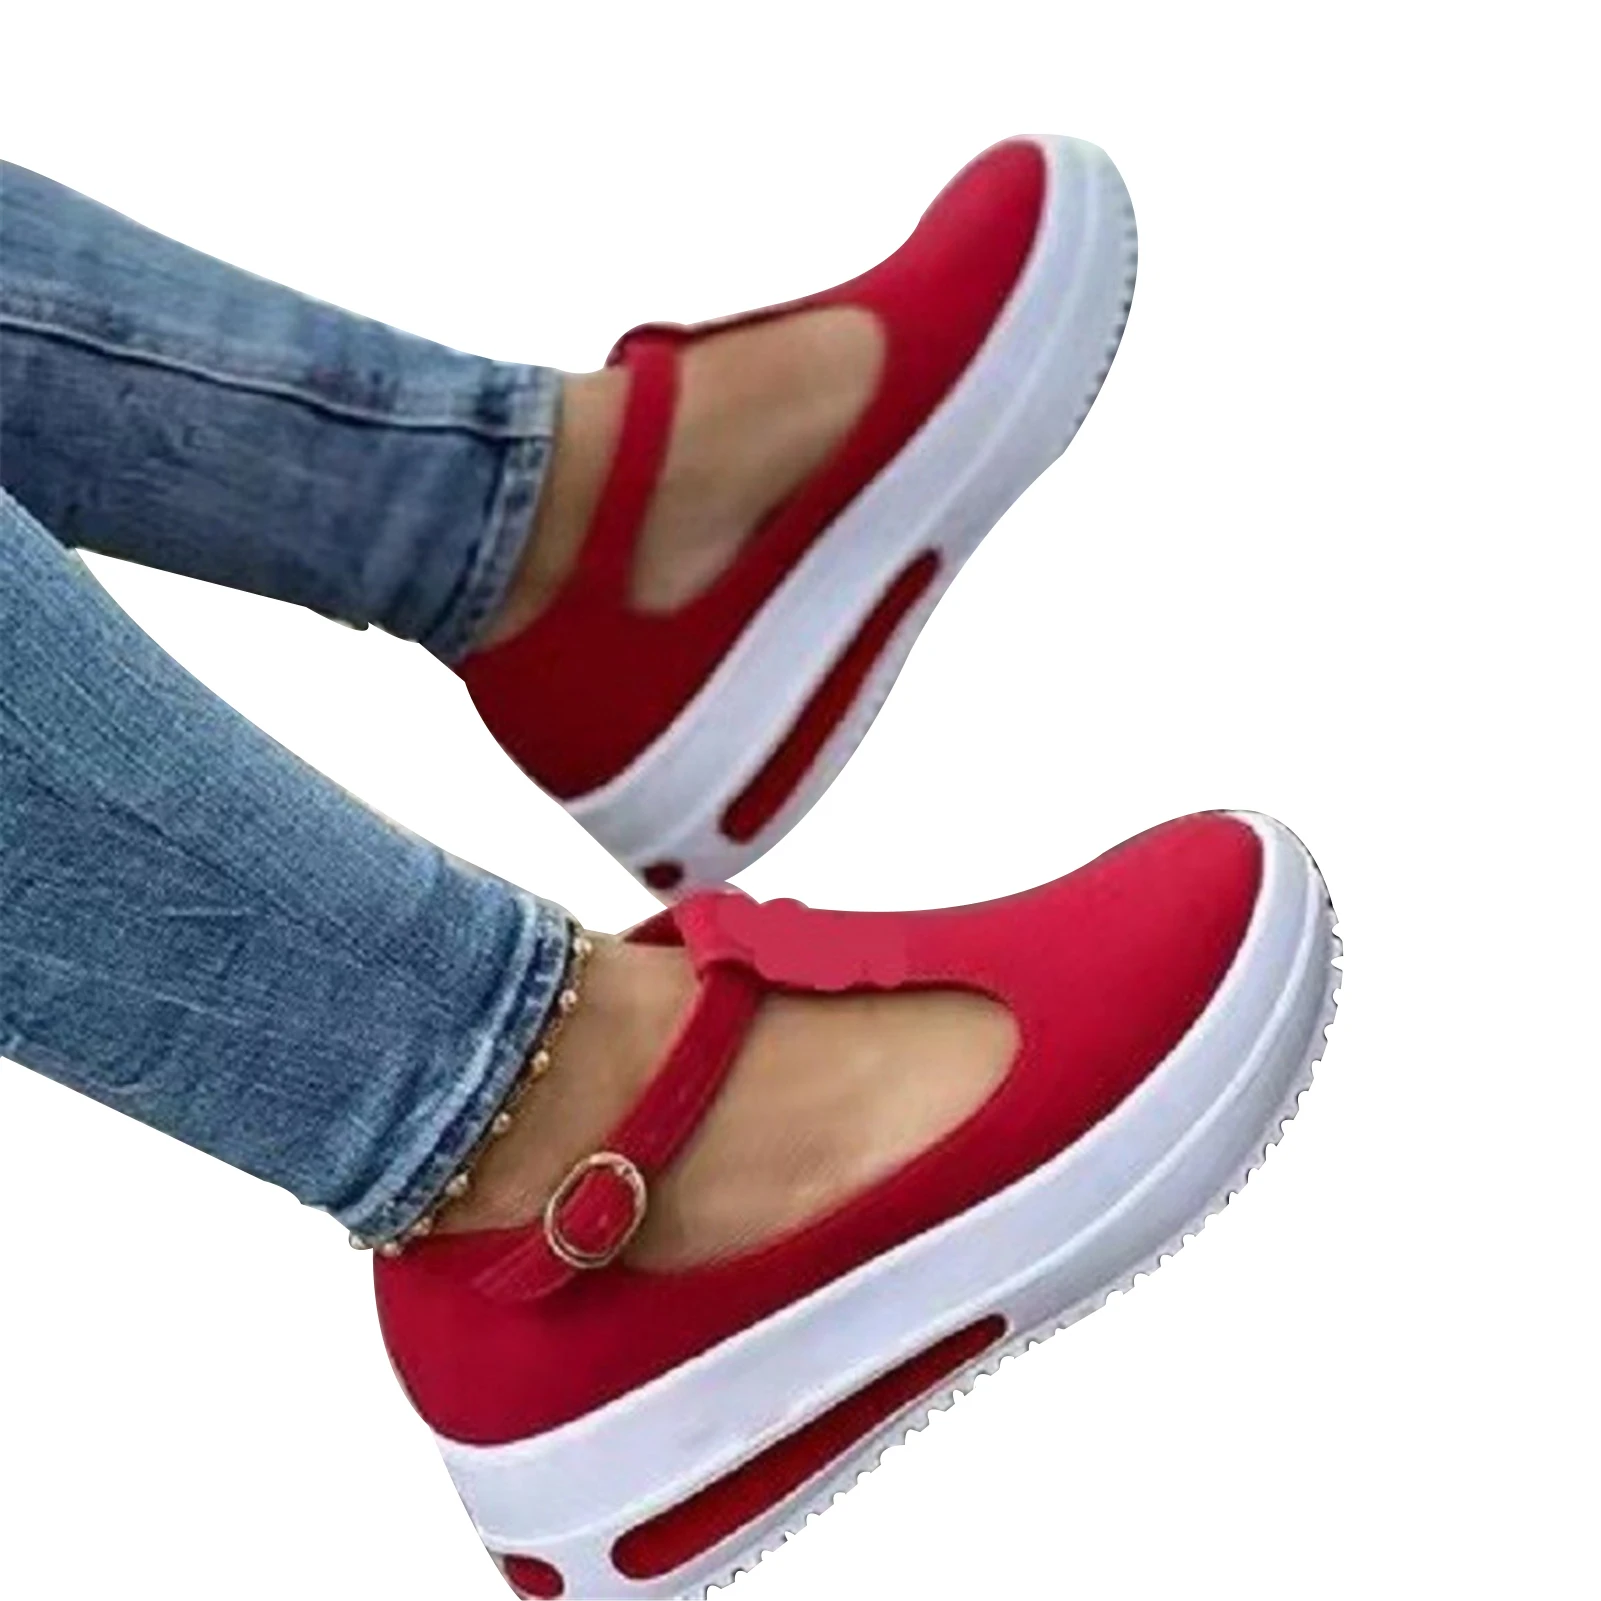 Wedge Heel Shoes Buckle Design Walking Shoe for Women EVAGNEE Spring Retro Round Head Loafers for Women 